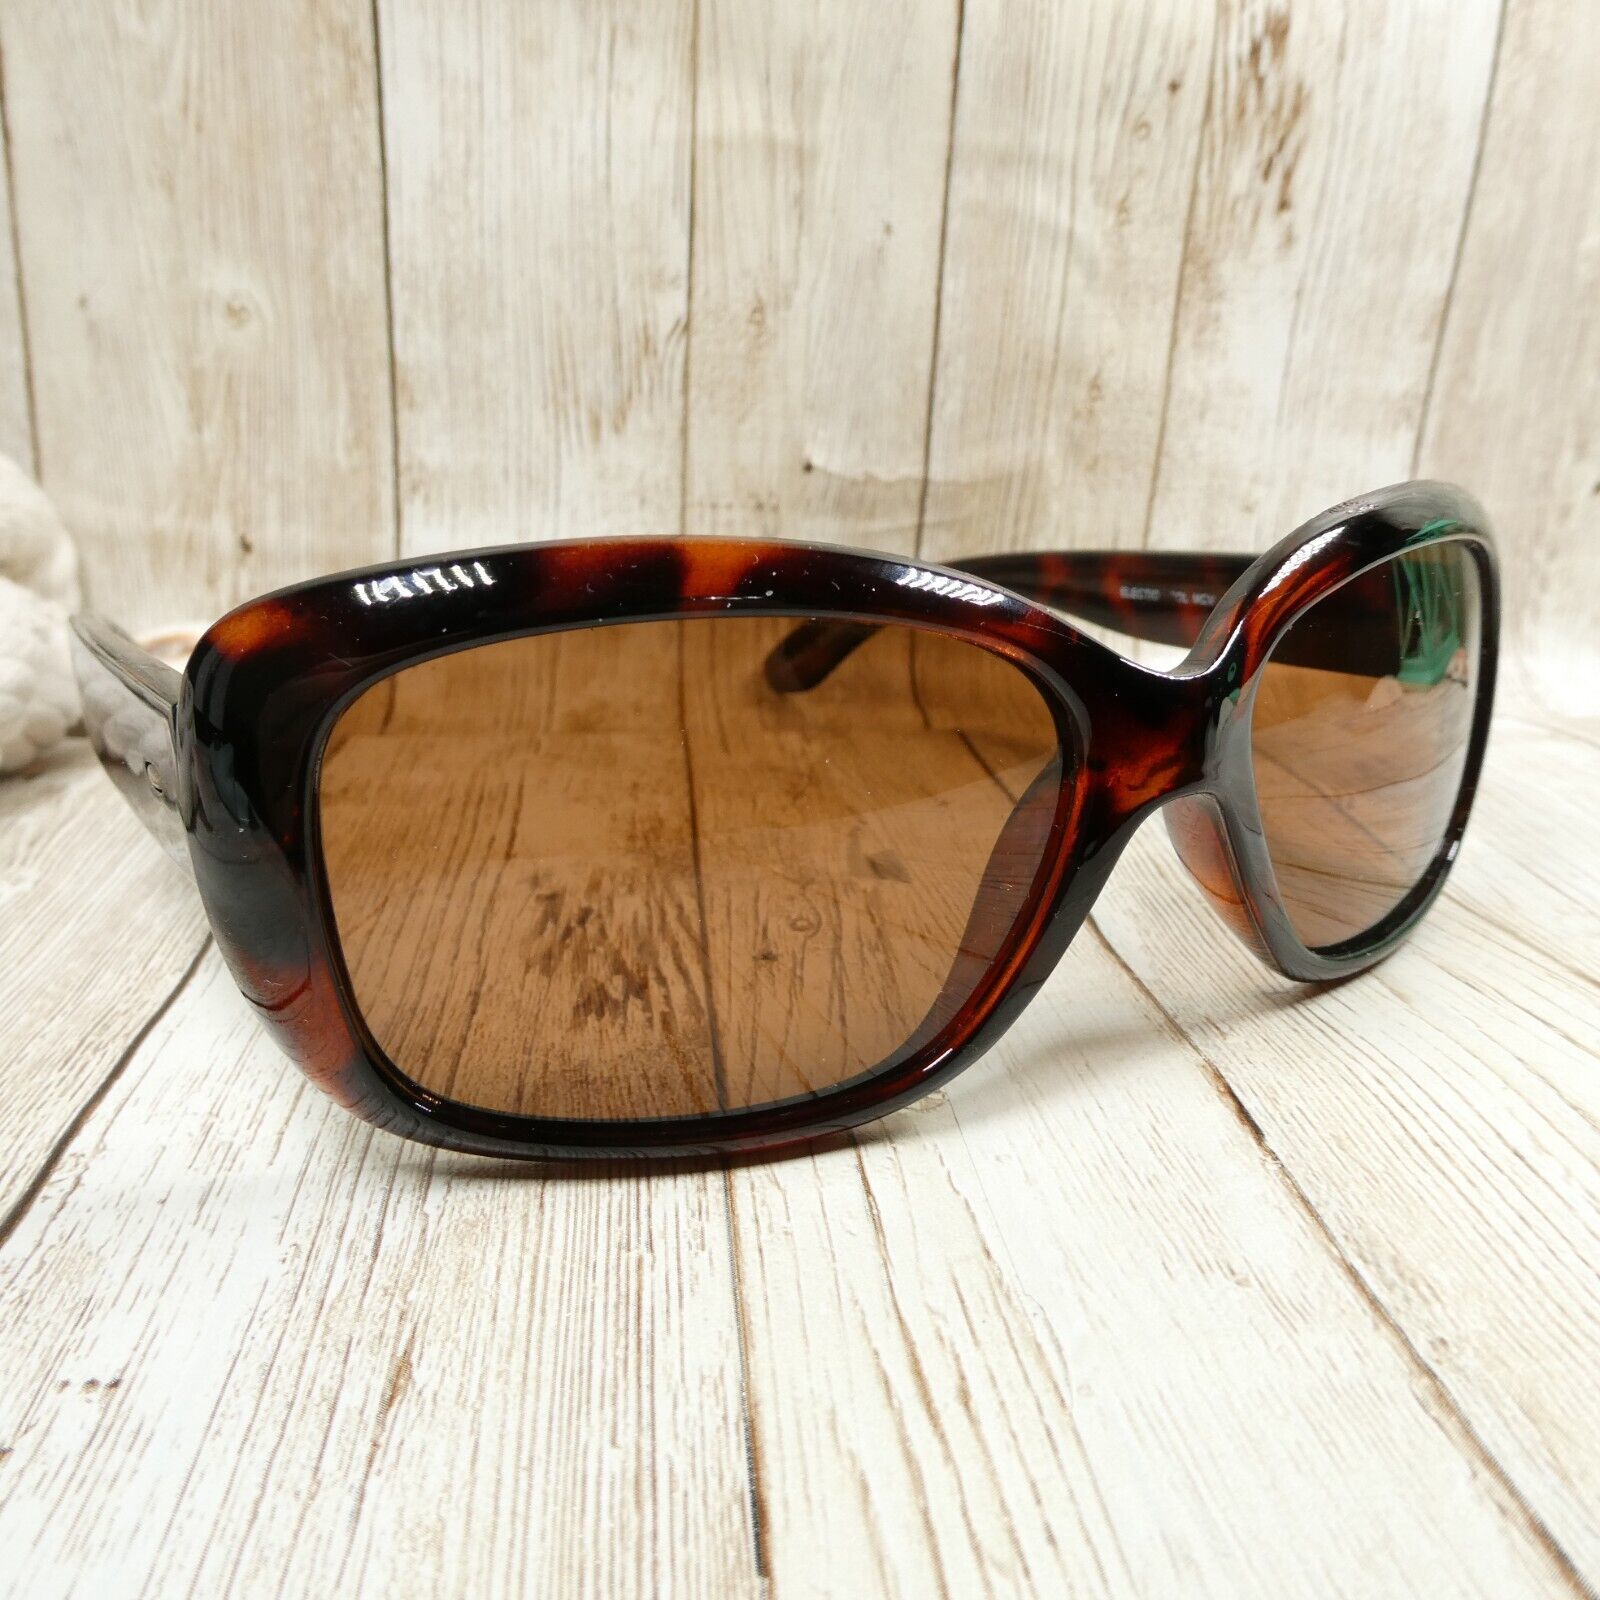 Primary image for Foster Grant Tortoise Polarized Sunglasses - Election